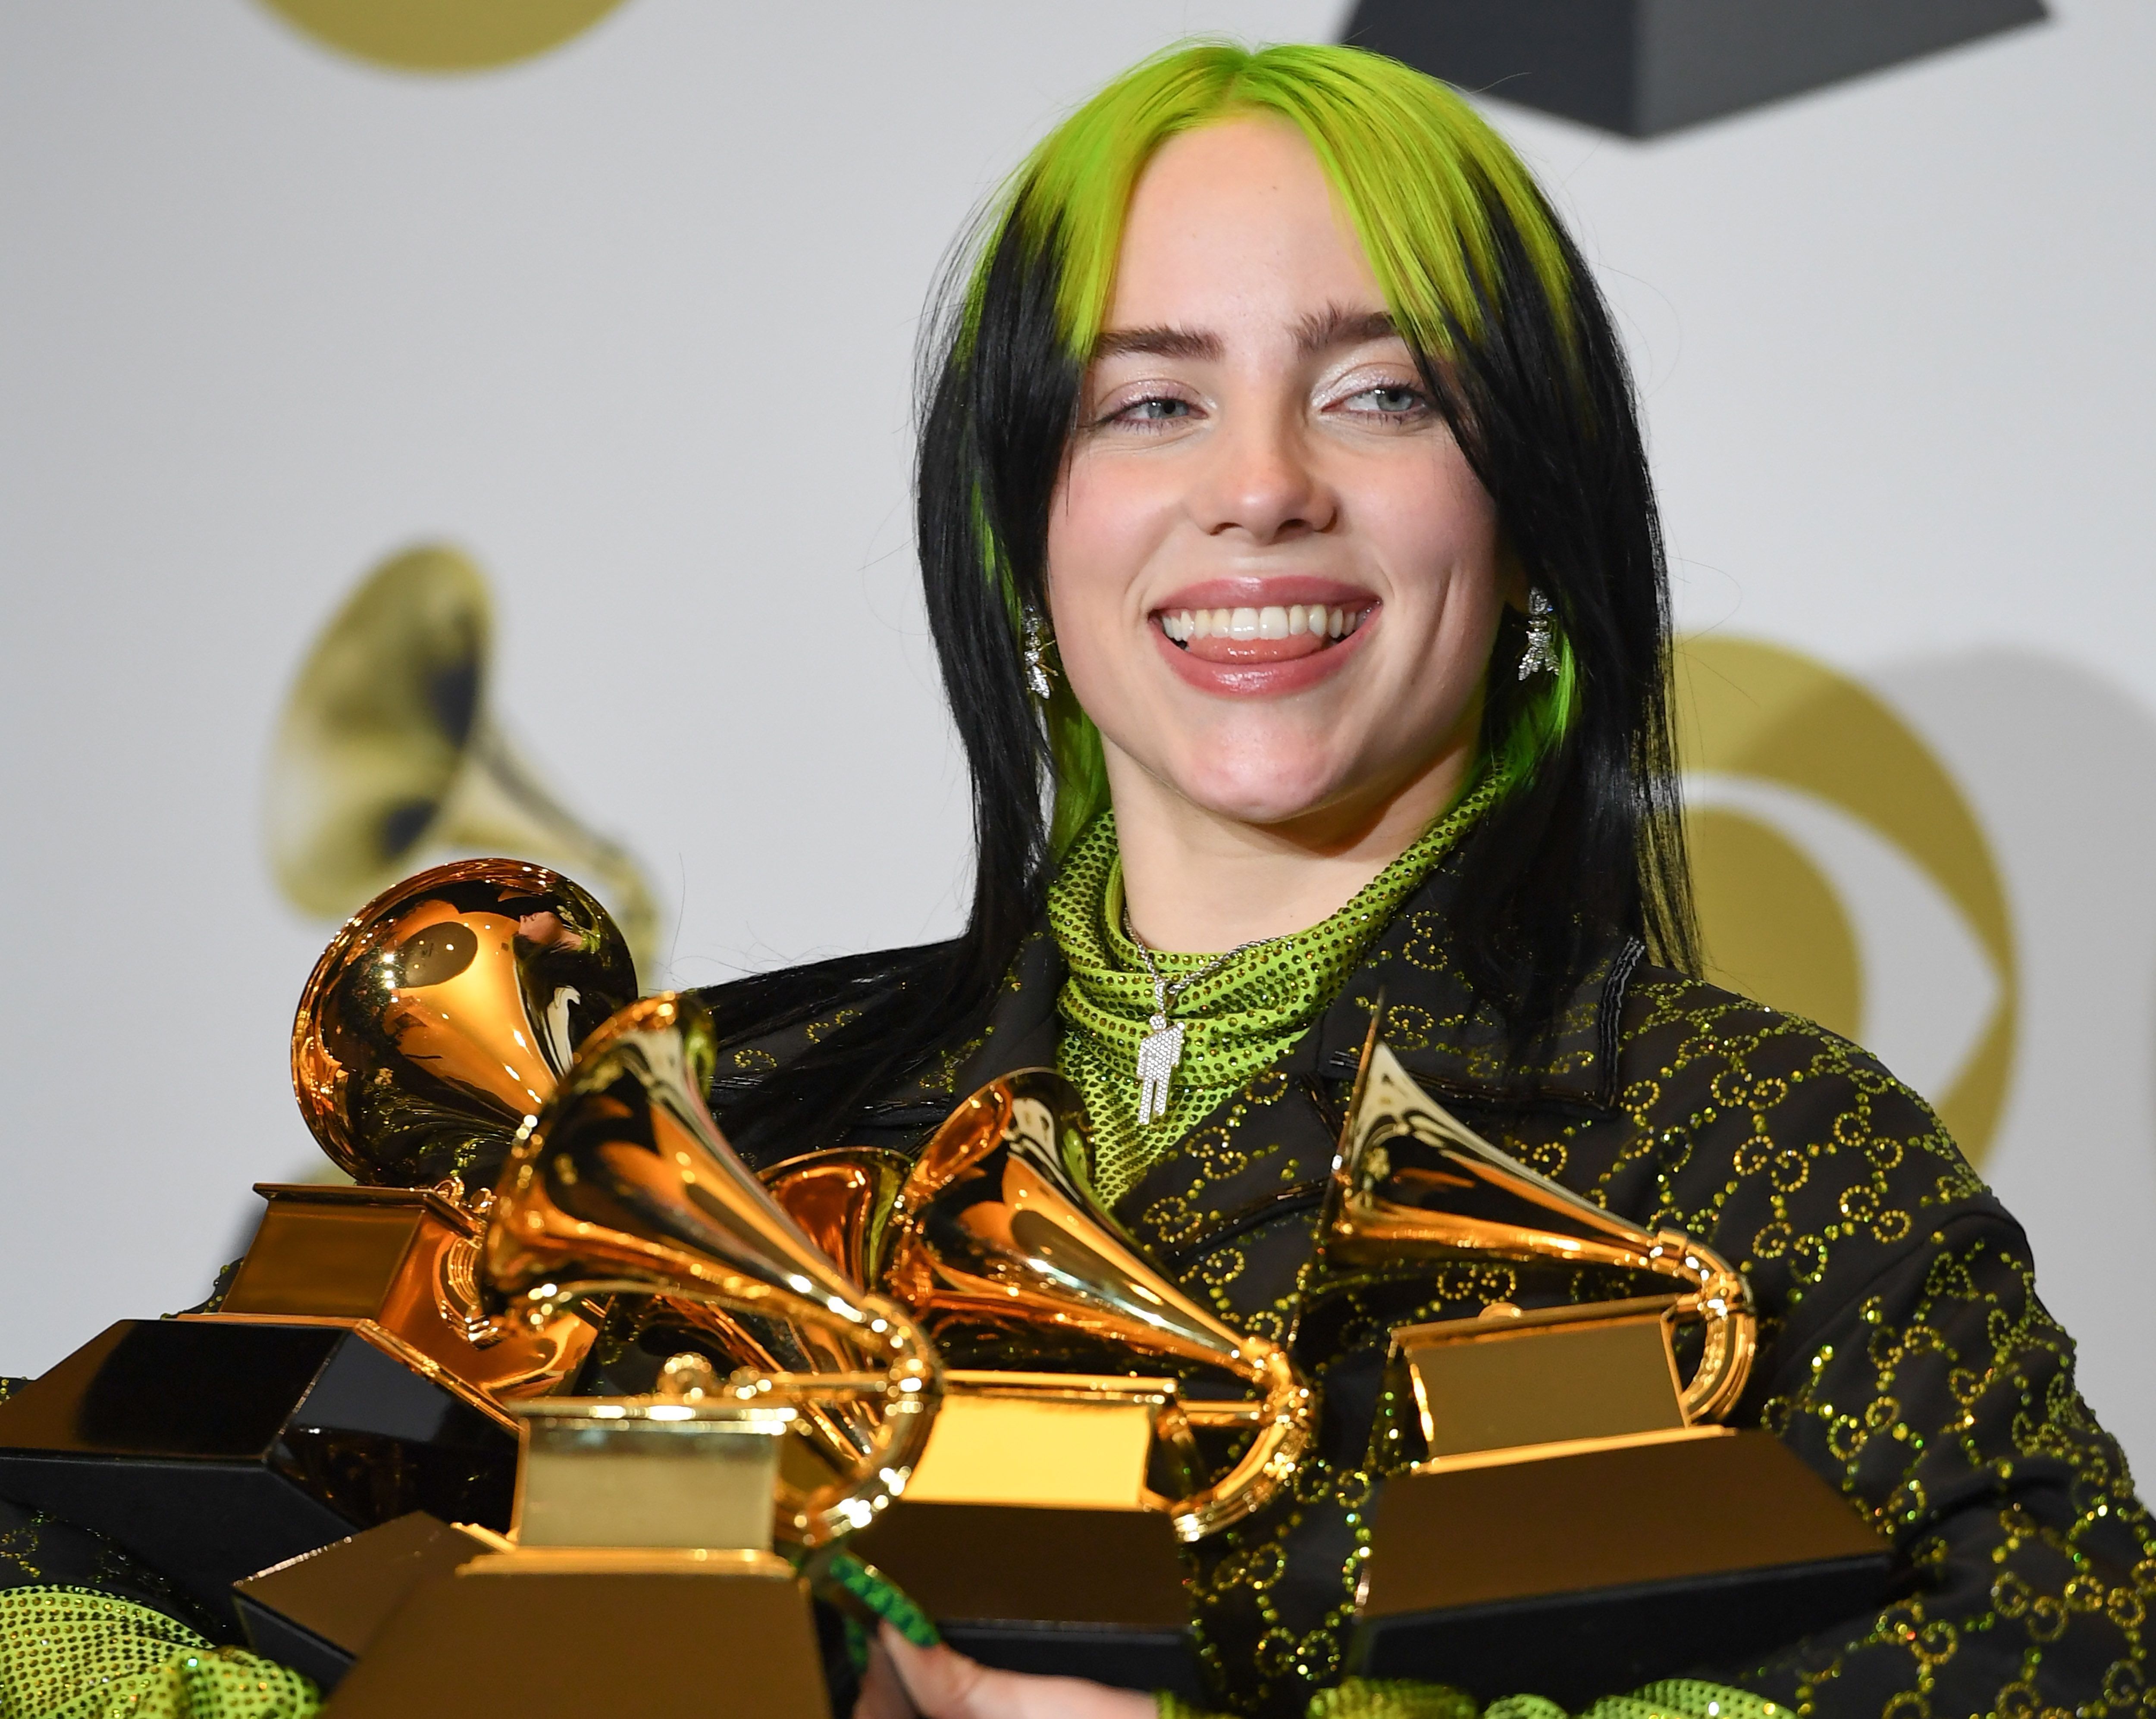 Billie Eilish Becomes the Youngest Artist to Win All Top Four Grammy Categories